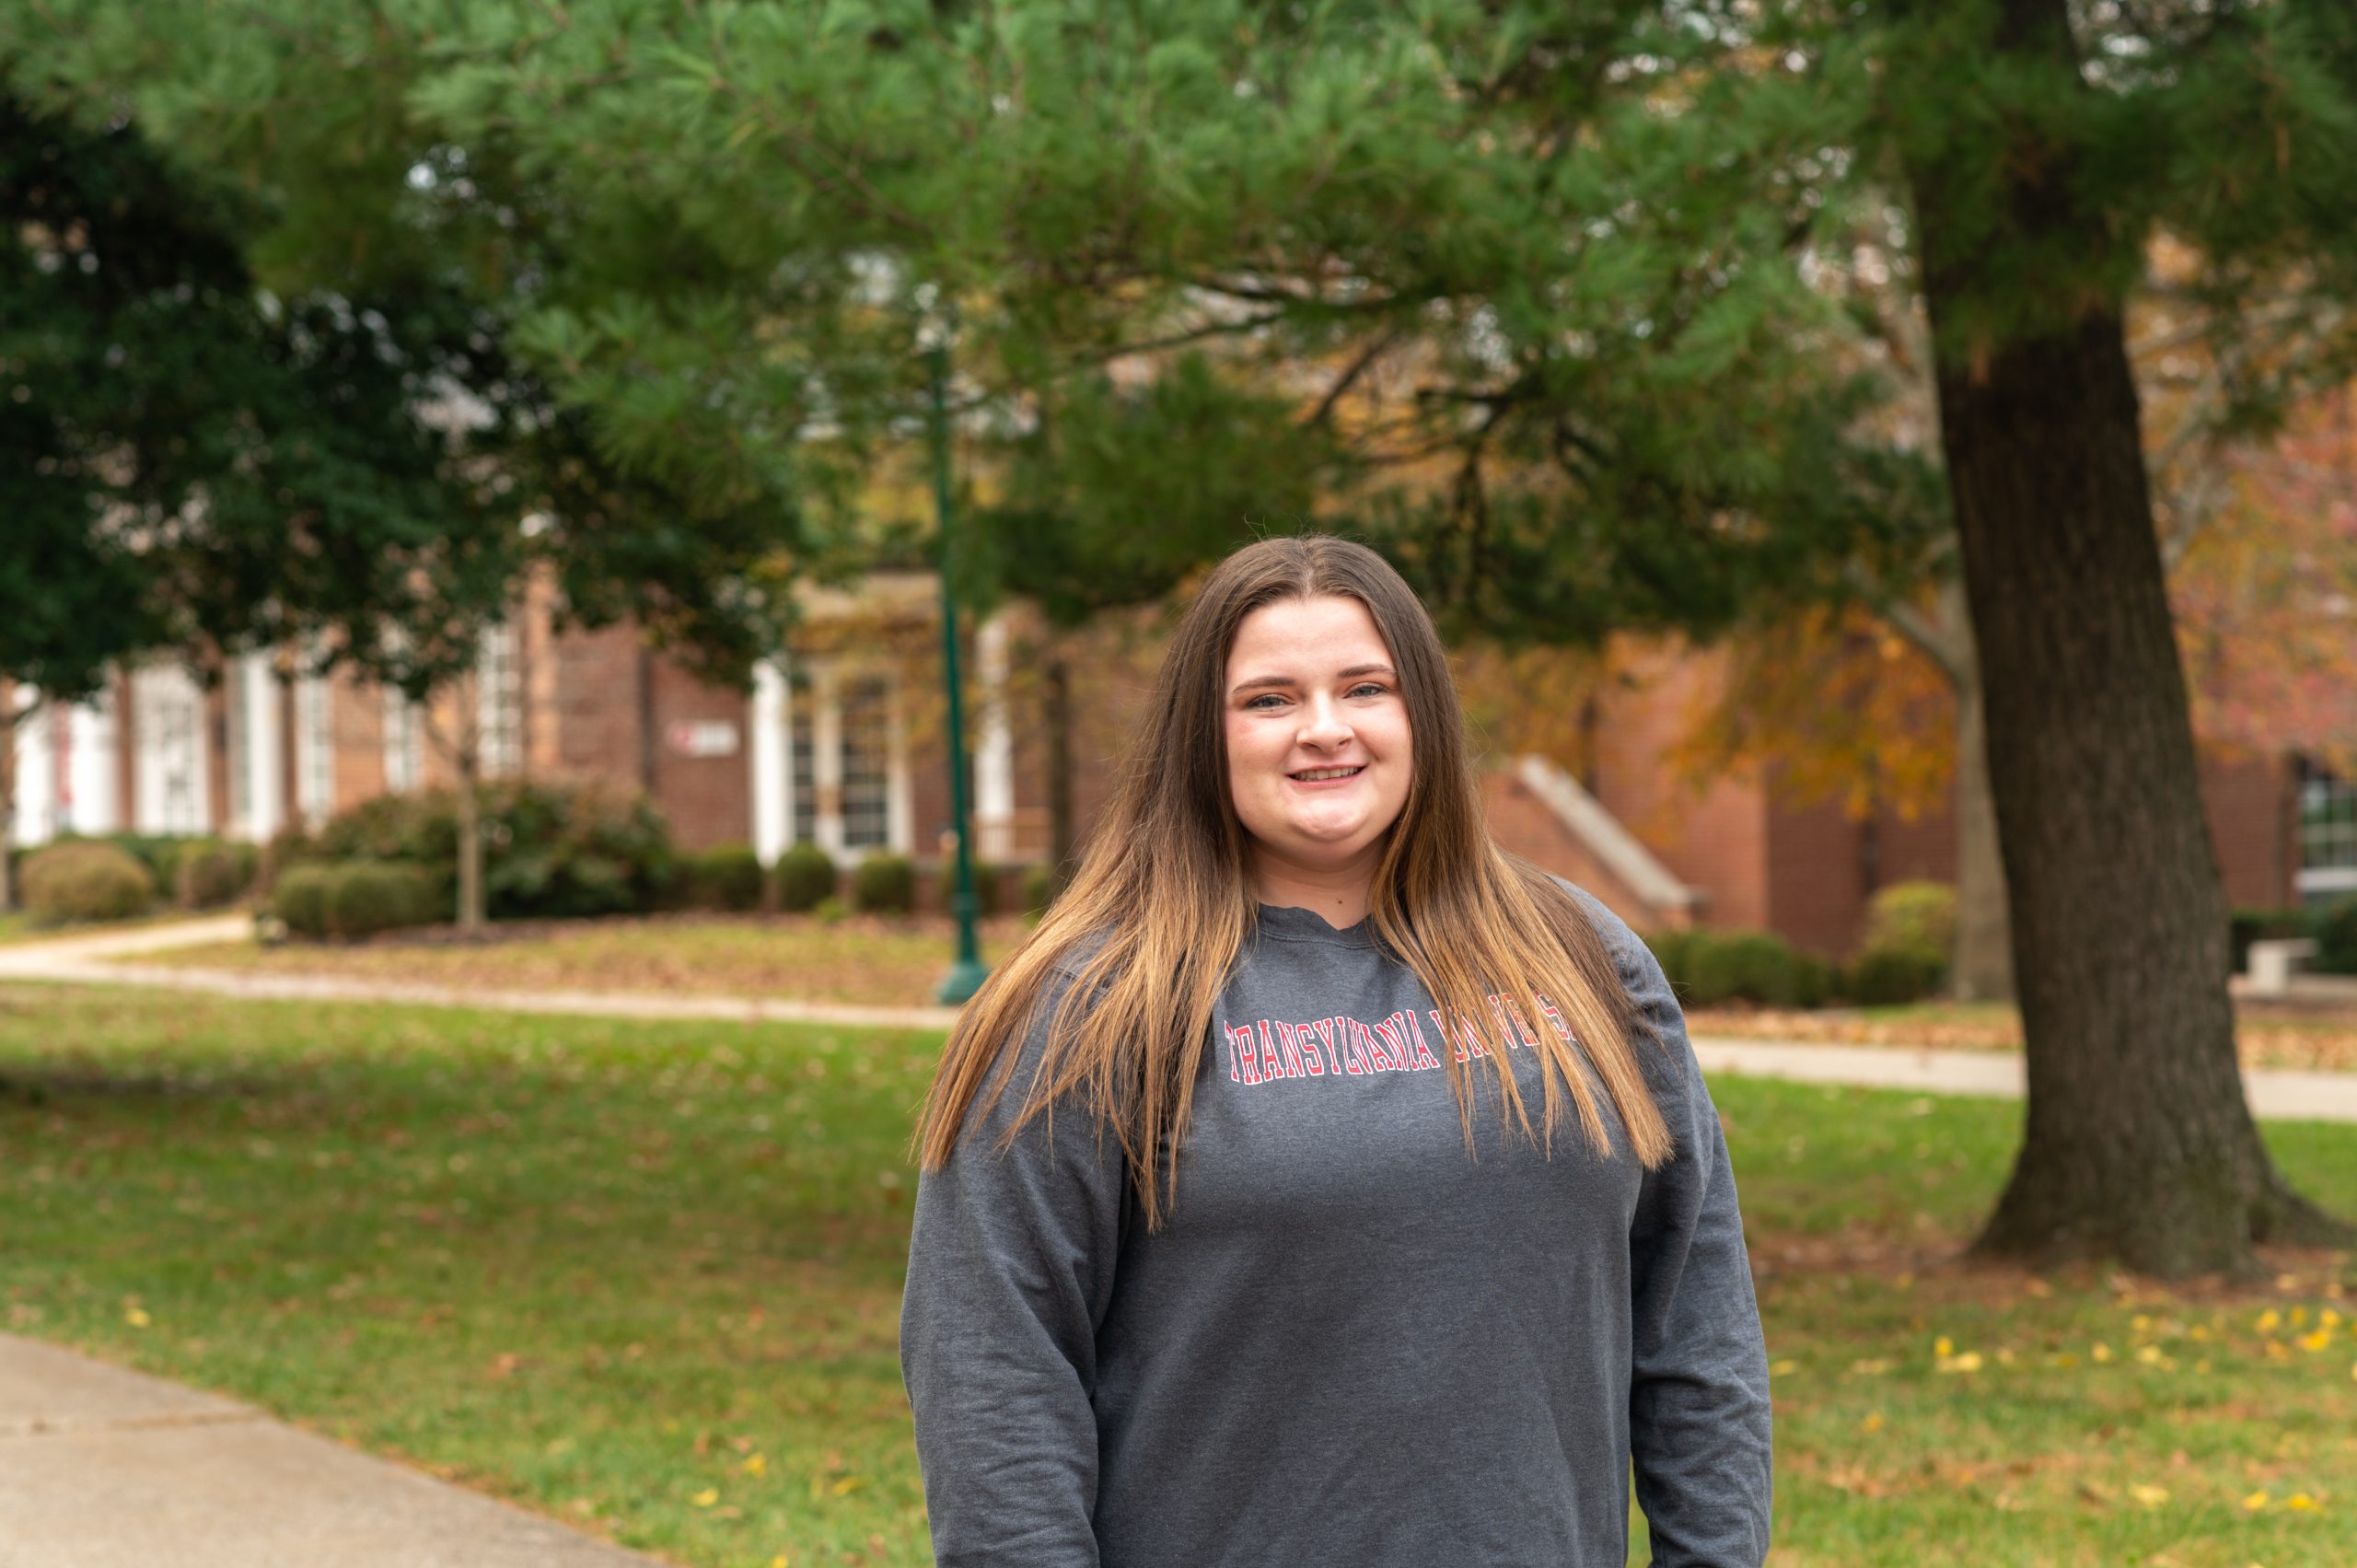 A Transylvania University student on the campus where she found a tight-knit community